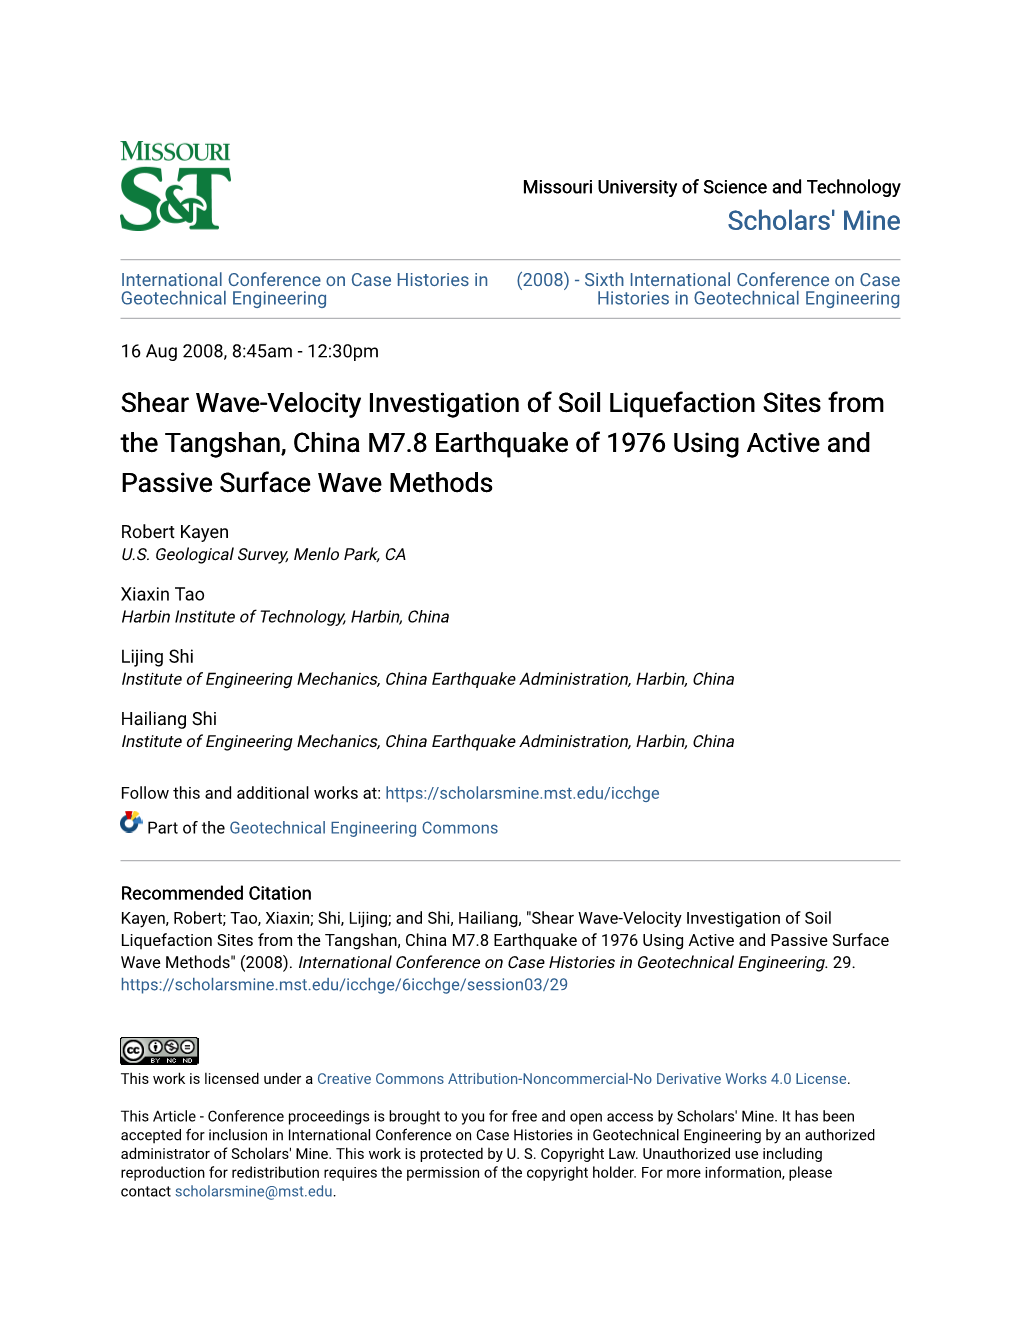 Shear Wave-Velocity Investigation of Soil Liquefaction Sites from the Tangshan, China M7.8 Earthquake of 1976 Using Active and Passive Surface Wave Methods